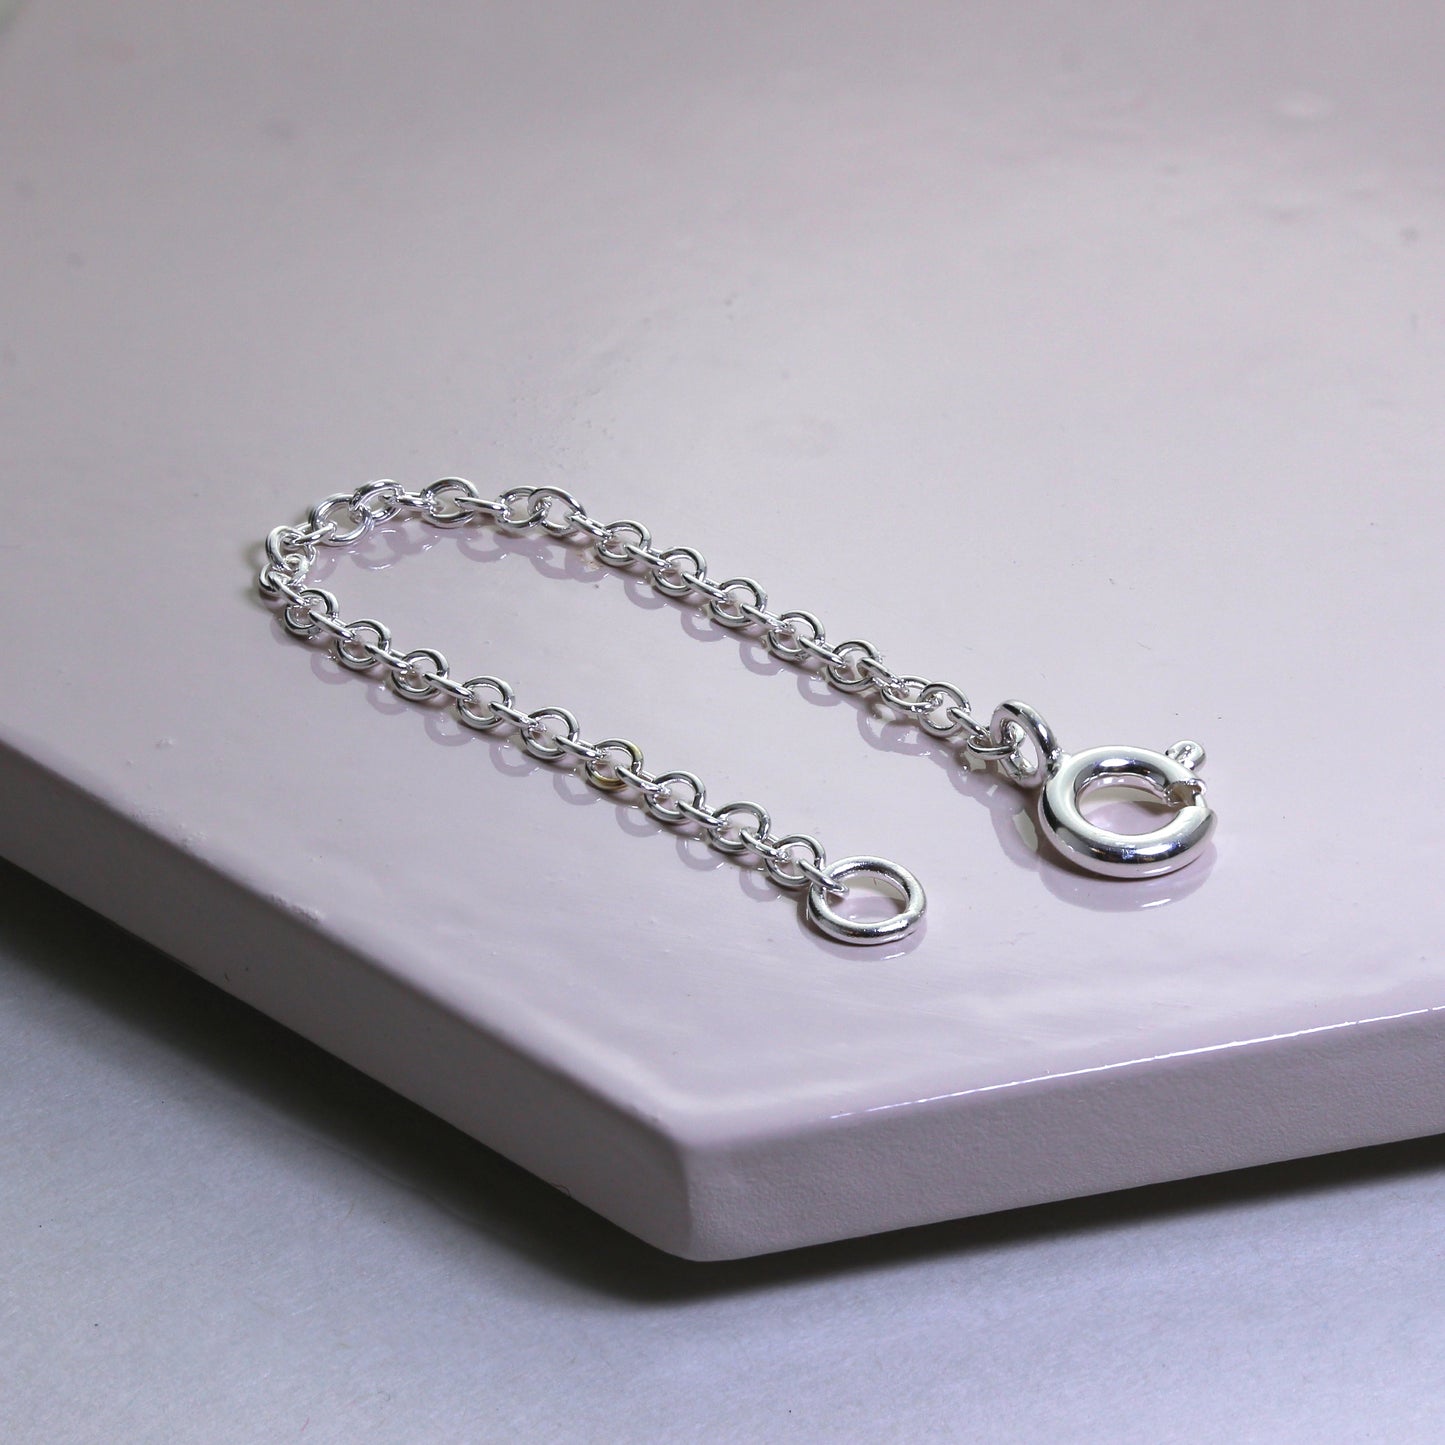 Sterling Silver Trace Chain Extender 2 - 4 Inches